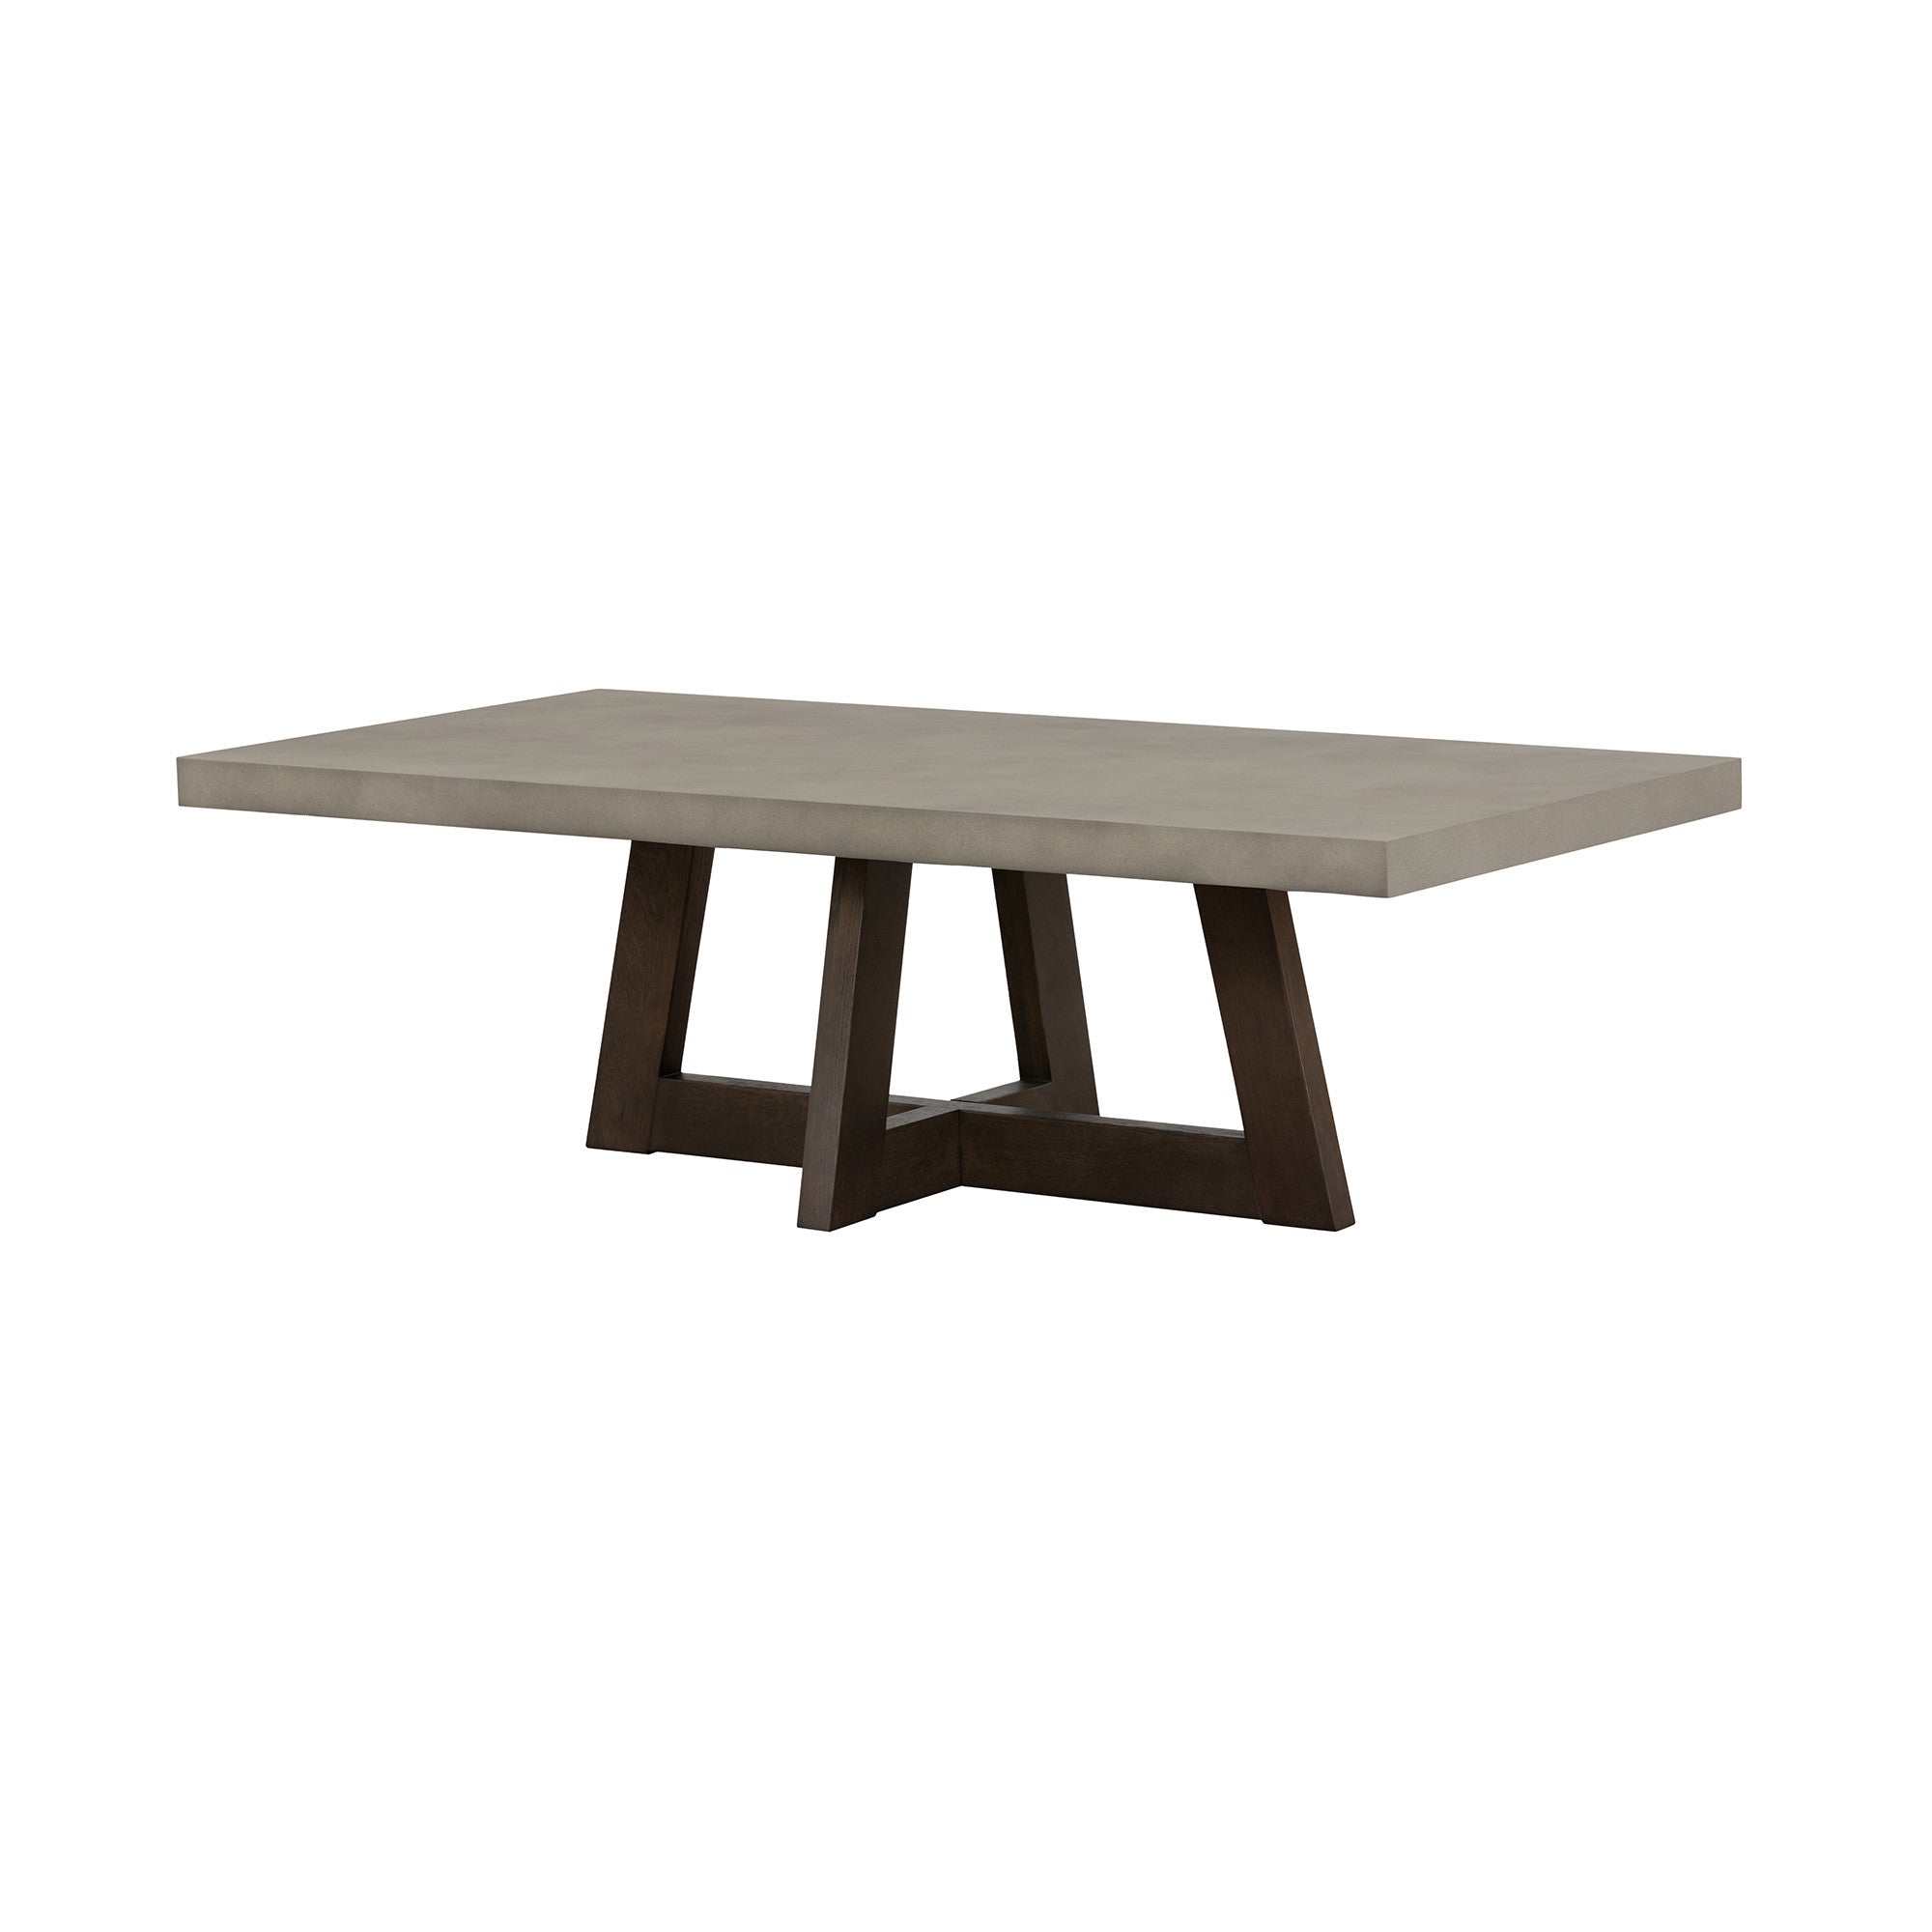 55" Gray And Brown Concrete And Solid Wood Coffee Table